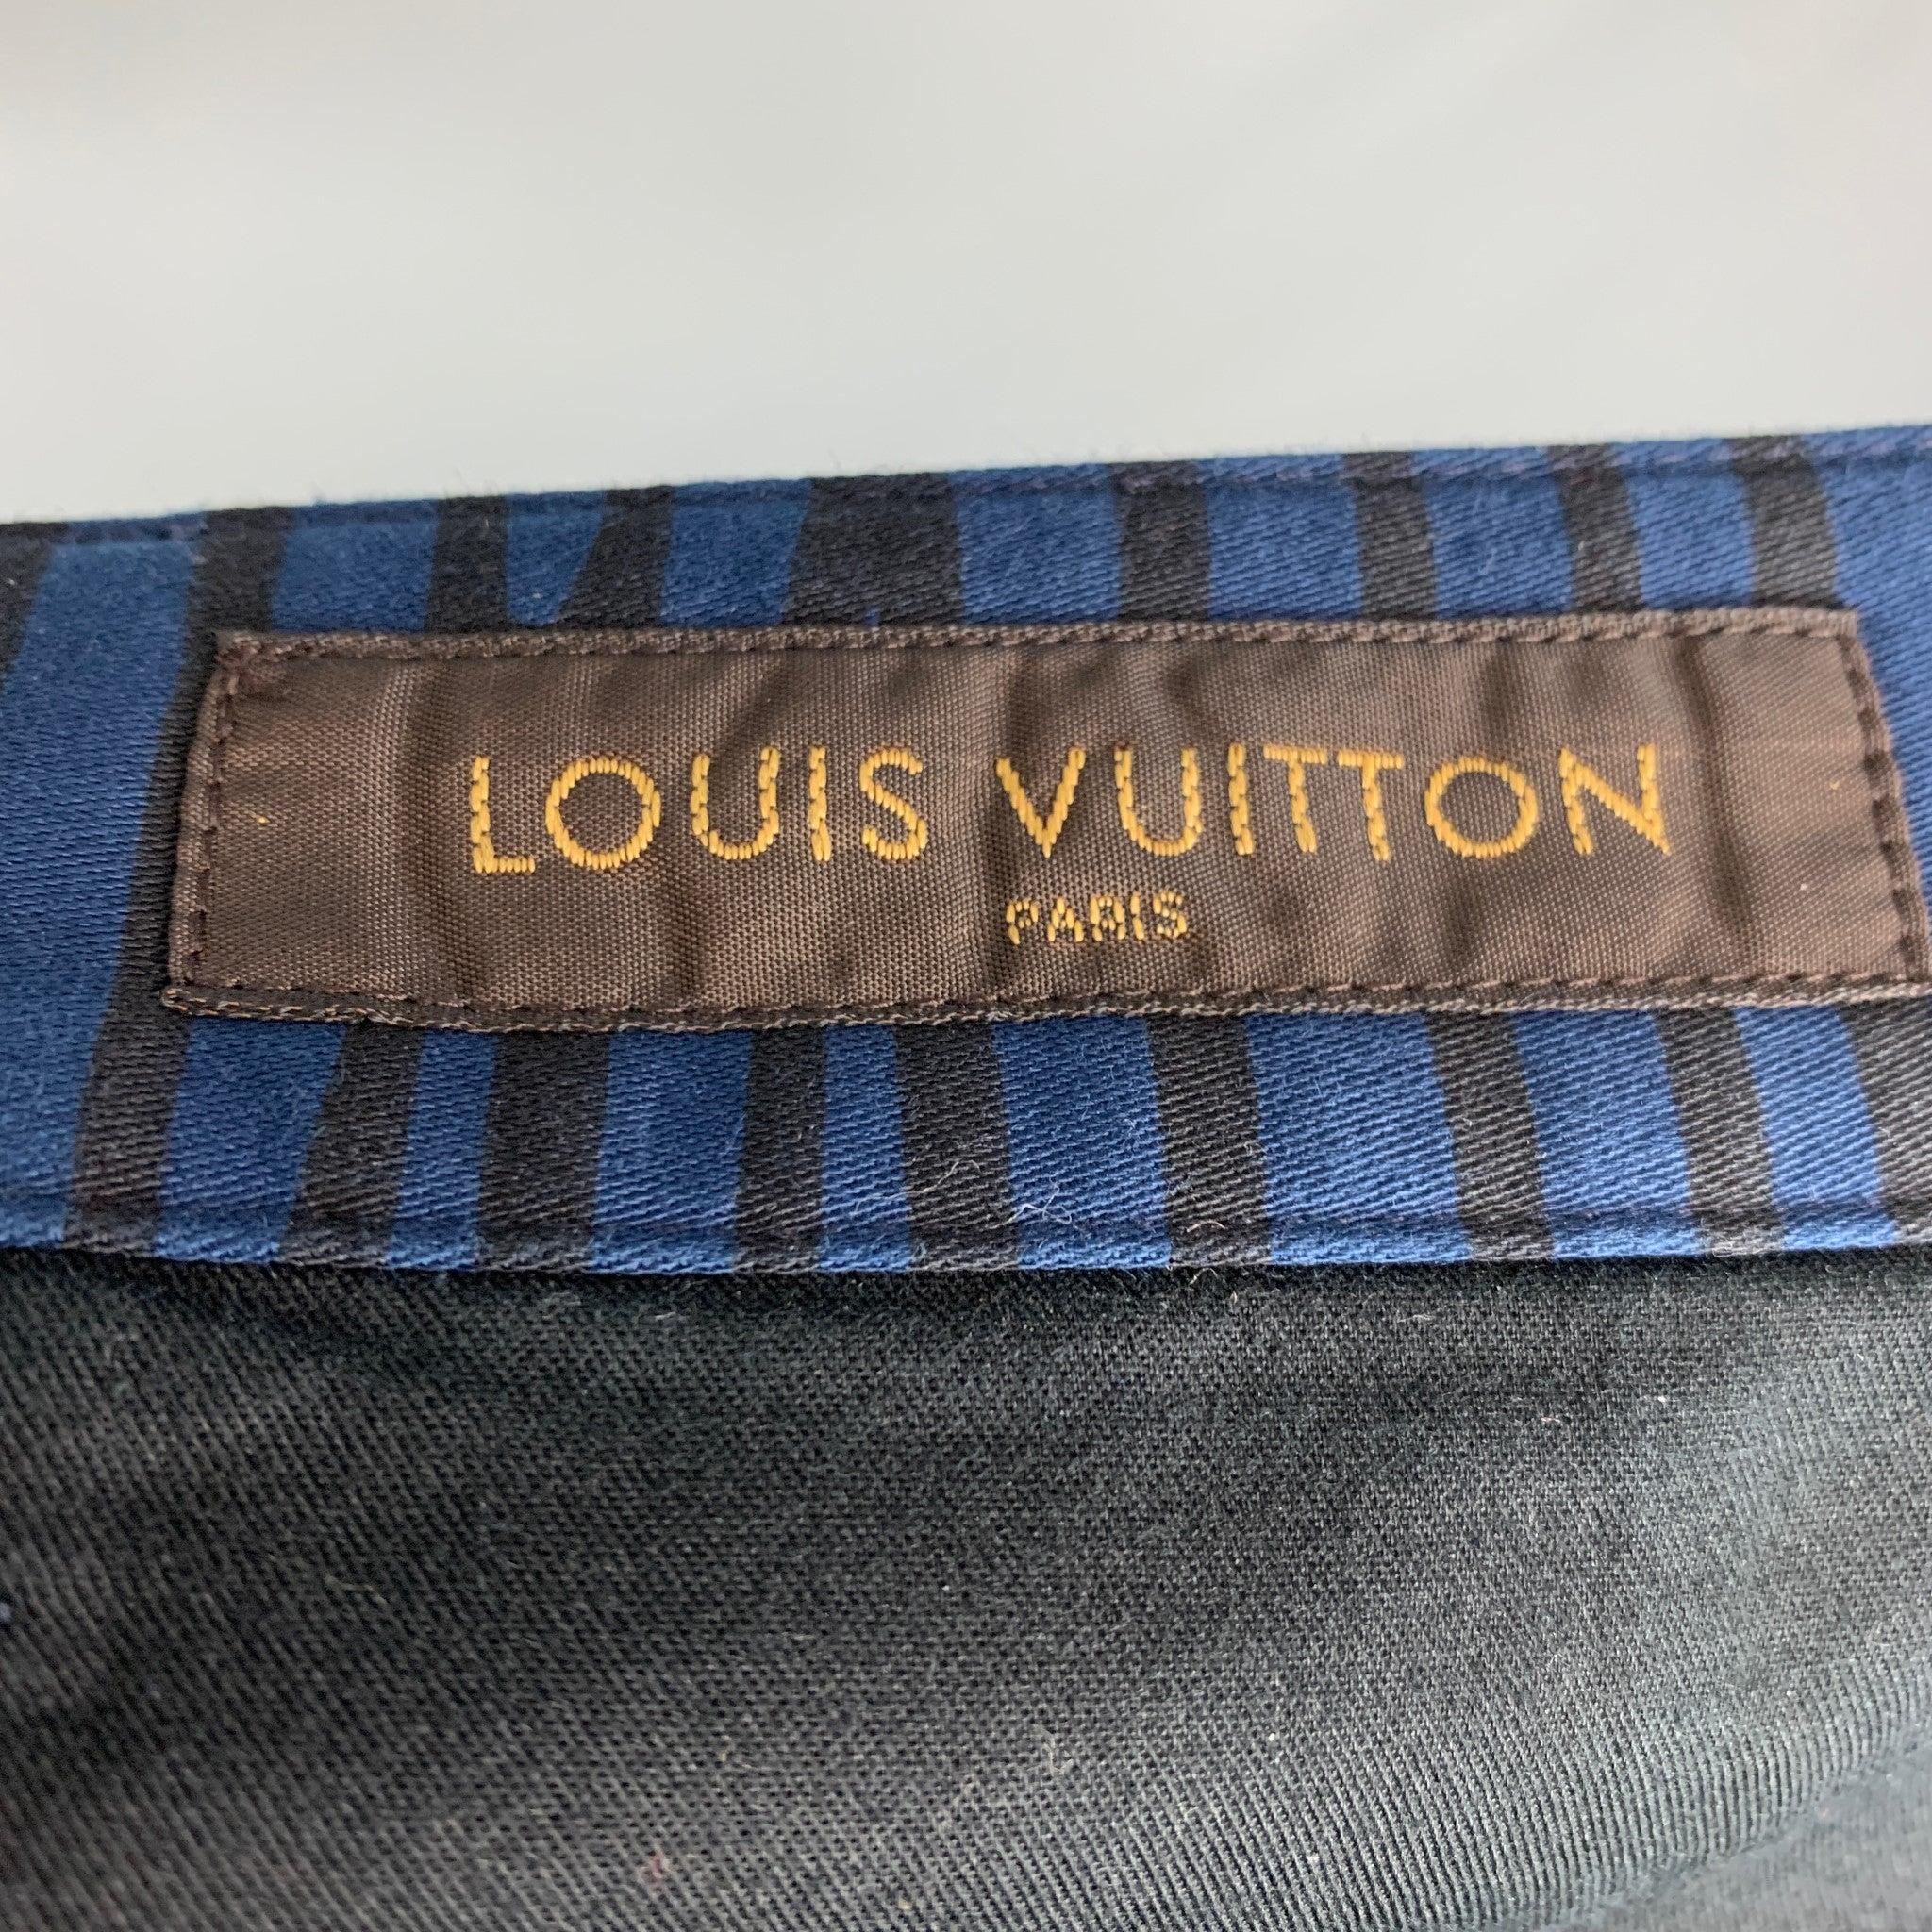 LOUIS VUITTON Size 32 Blue Black Stripe Cotton Pleated Shorts In Good Condition For Sale In San Francisco, CA